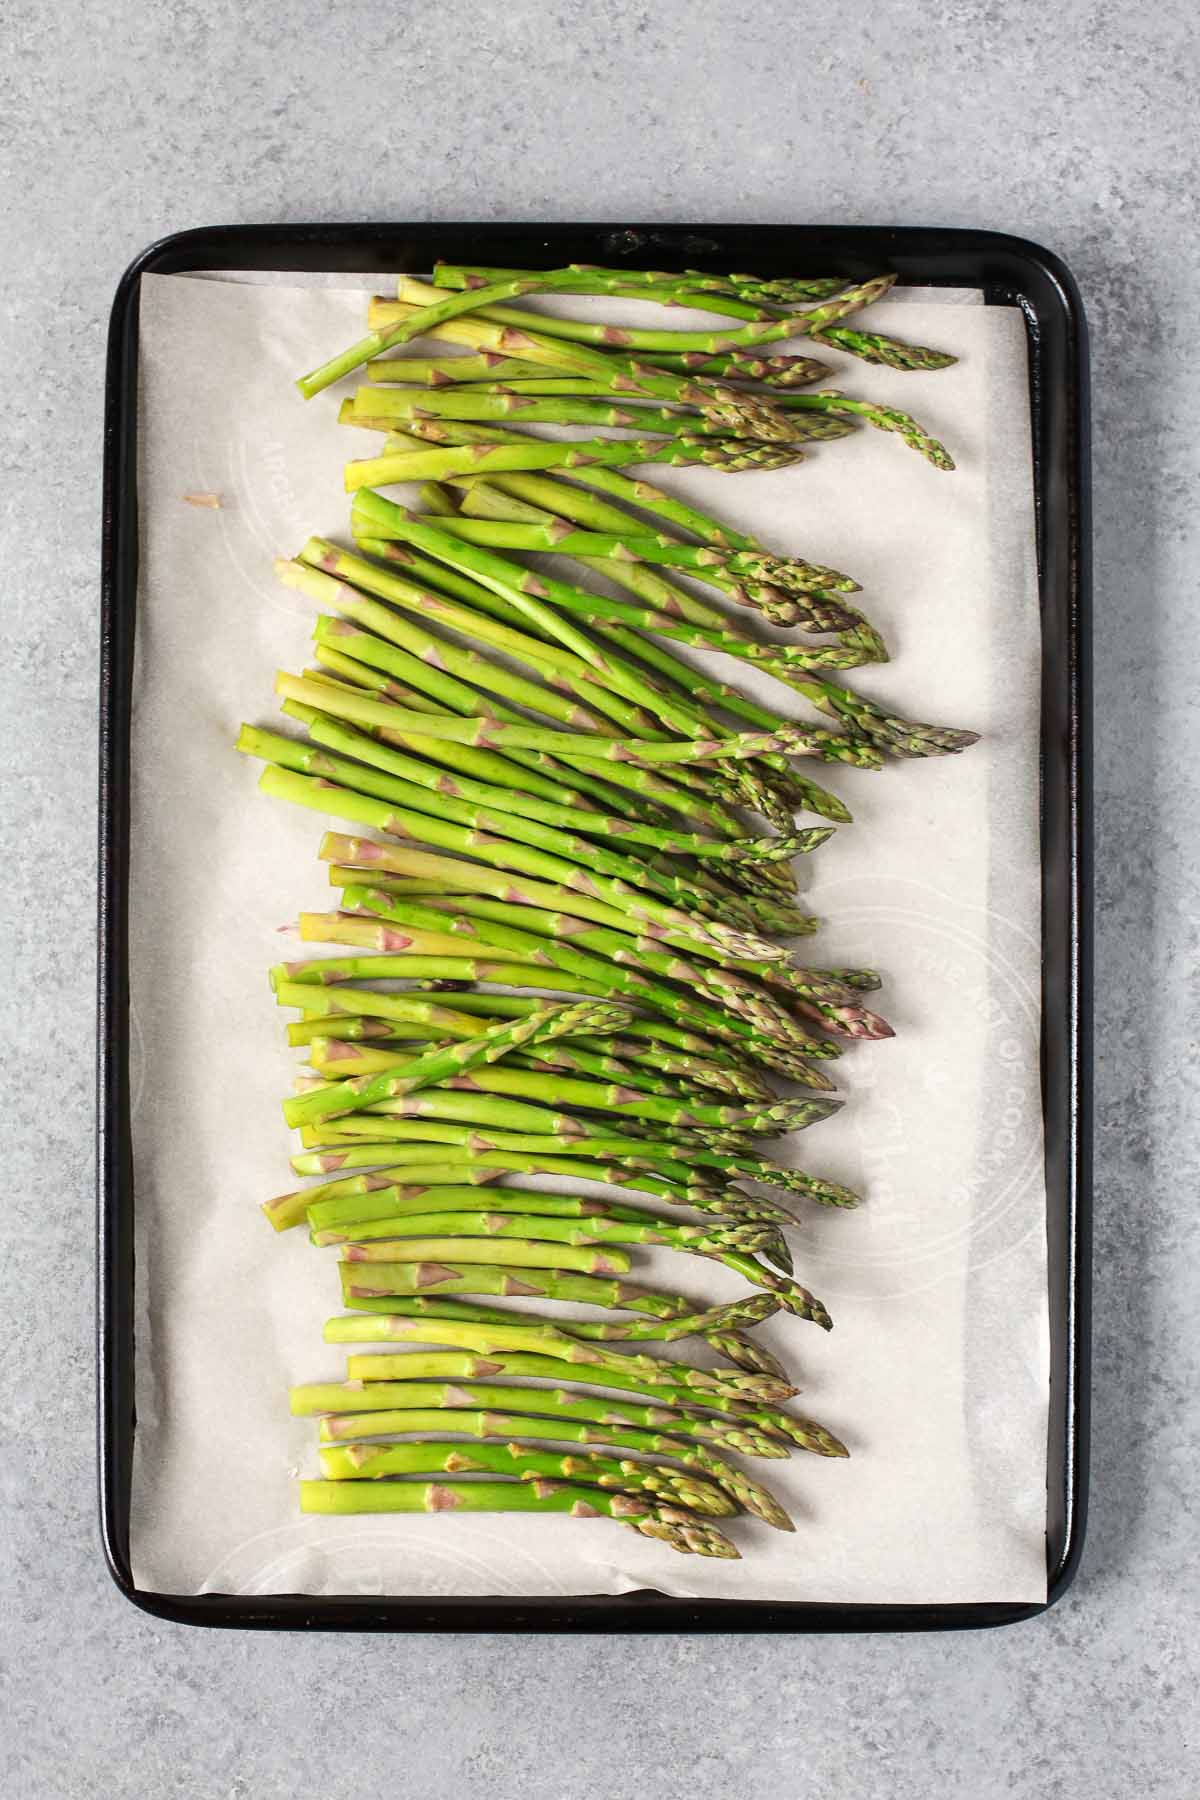 Placing prepared asparagus onto a sheet pan lined with parchment paper.